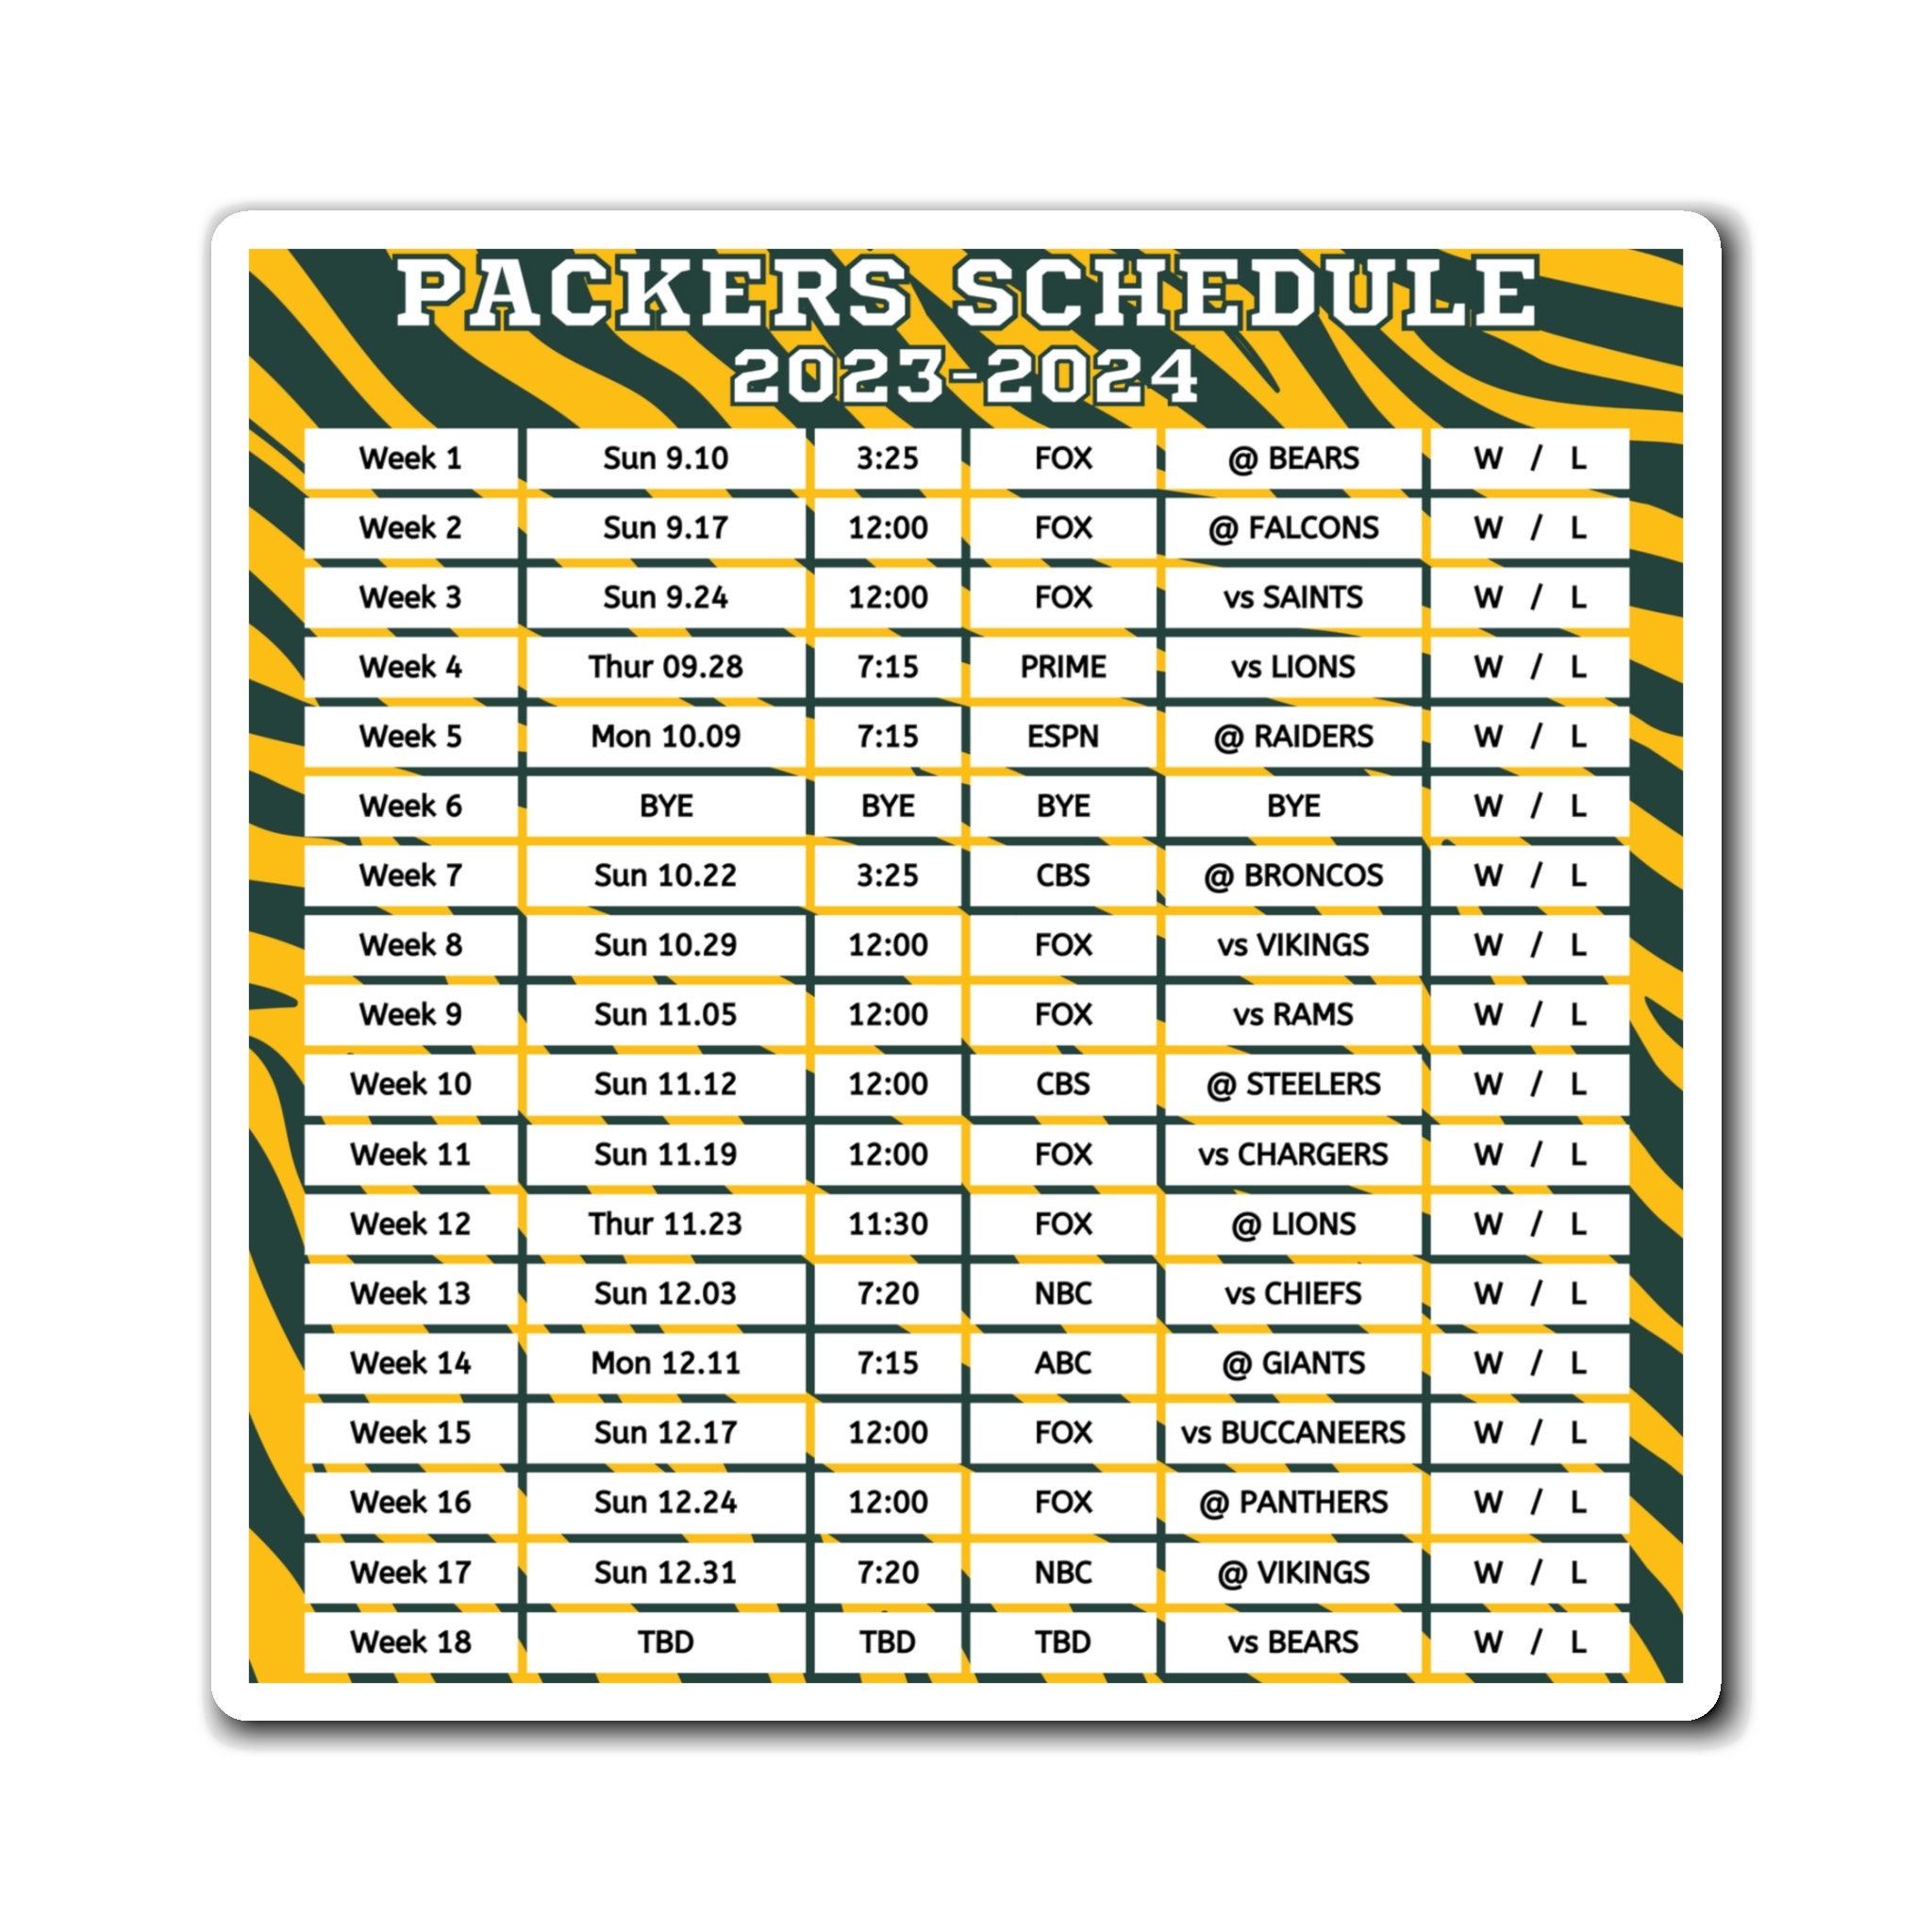 2023 2024 Green Bay Packers Schedule Magnet 6 X 6 Inches NFL - Etsy